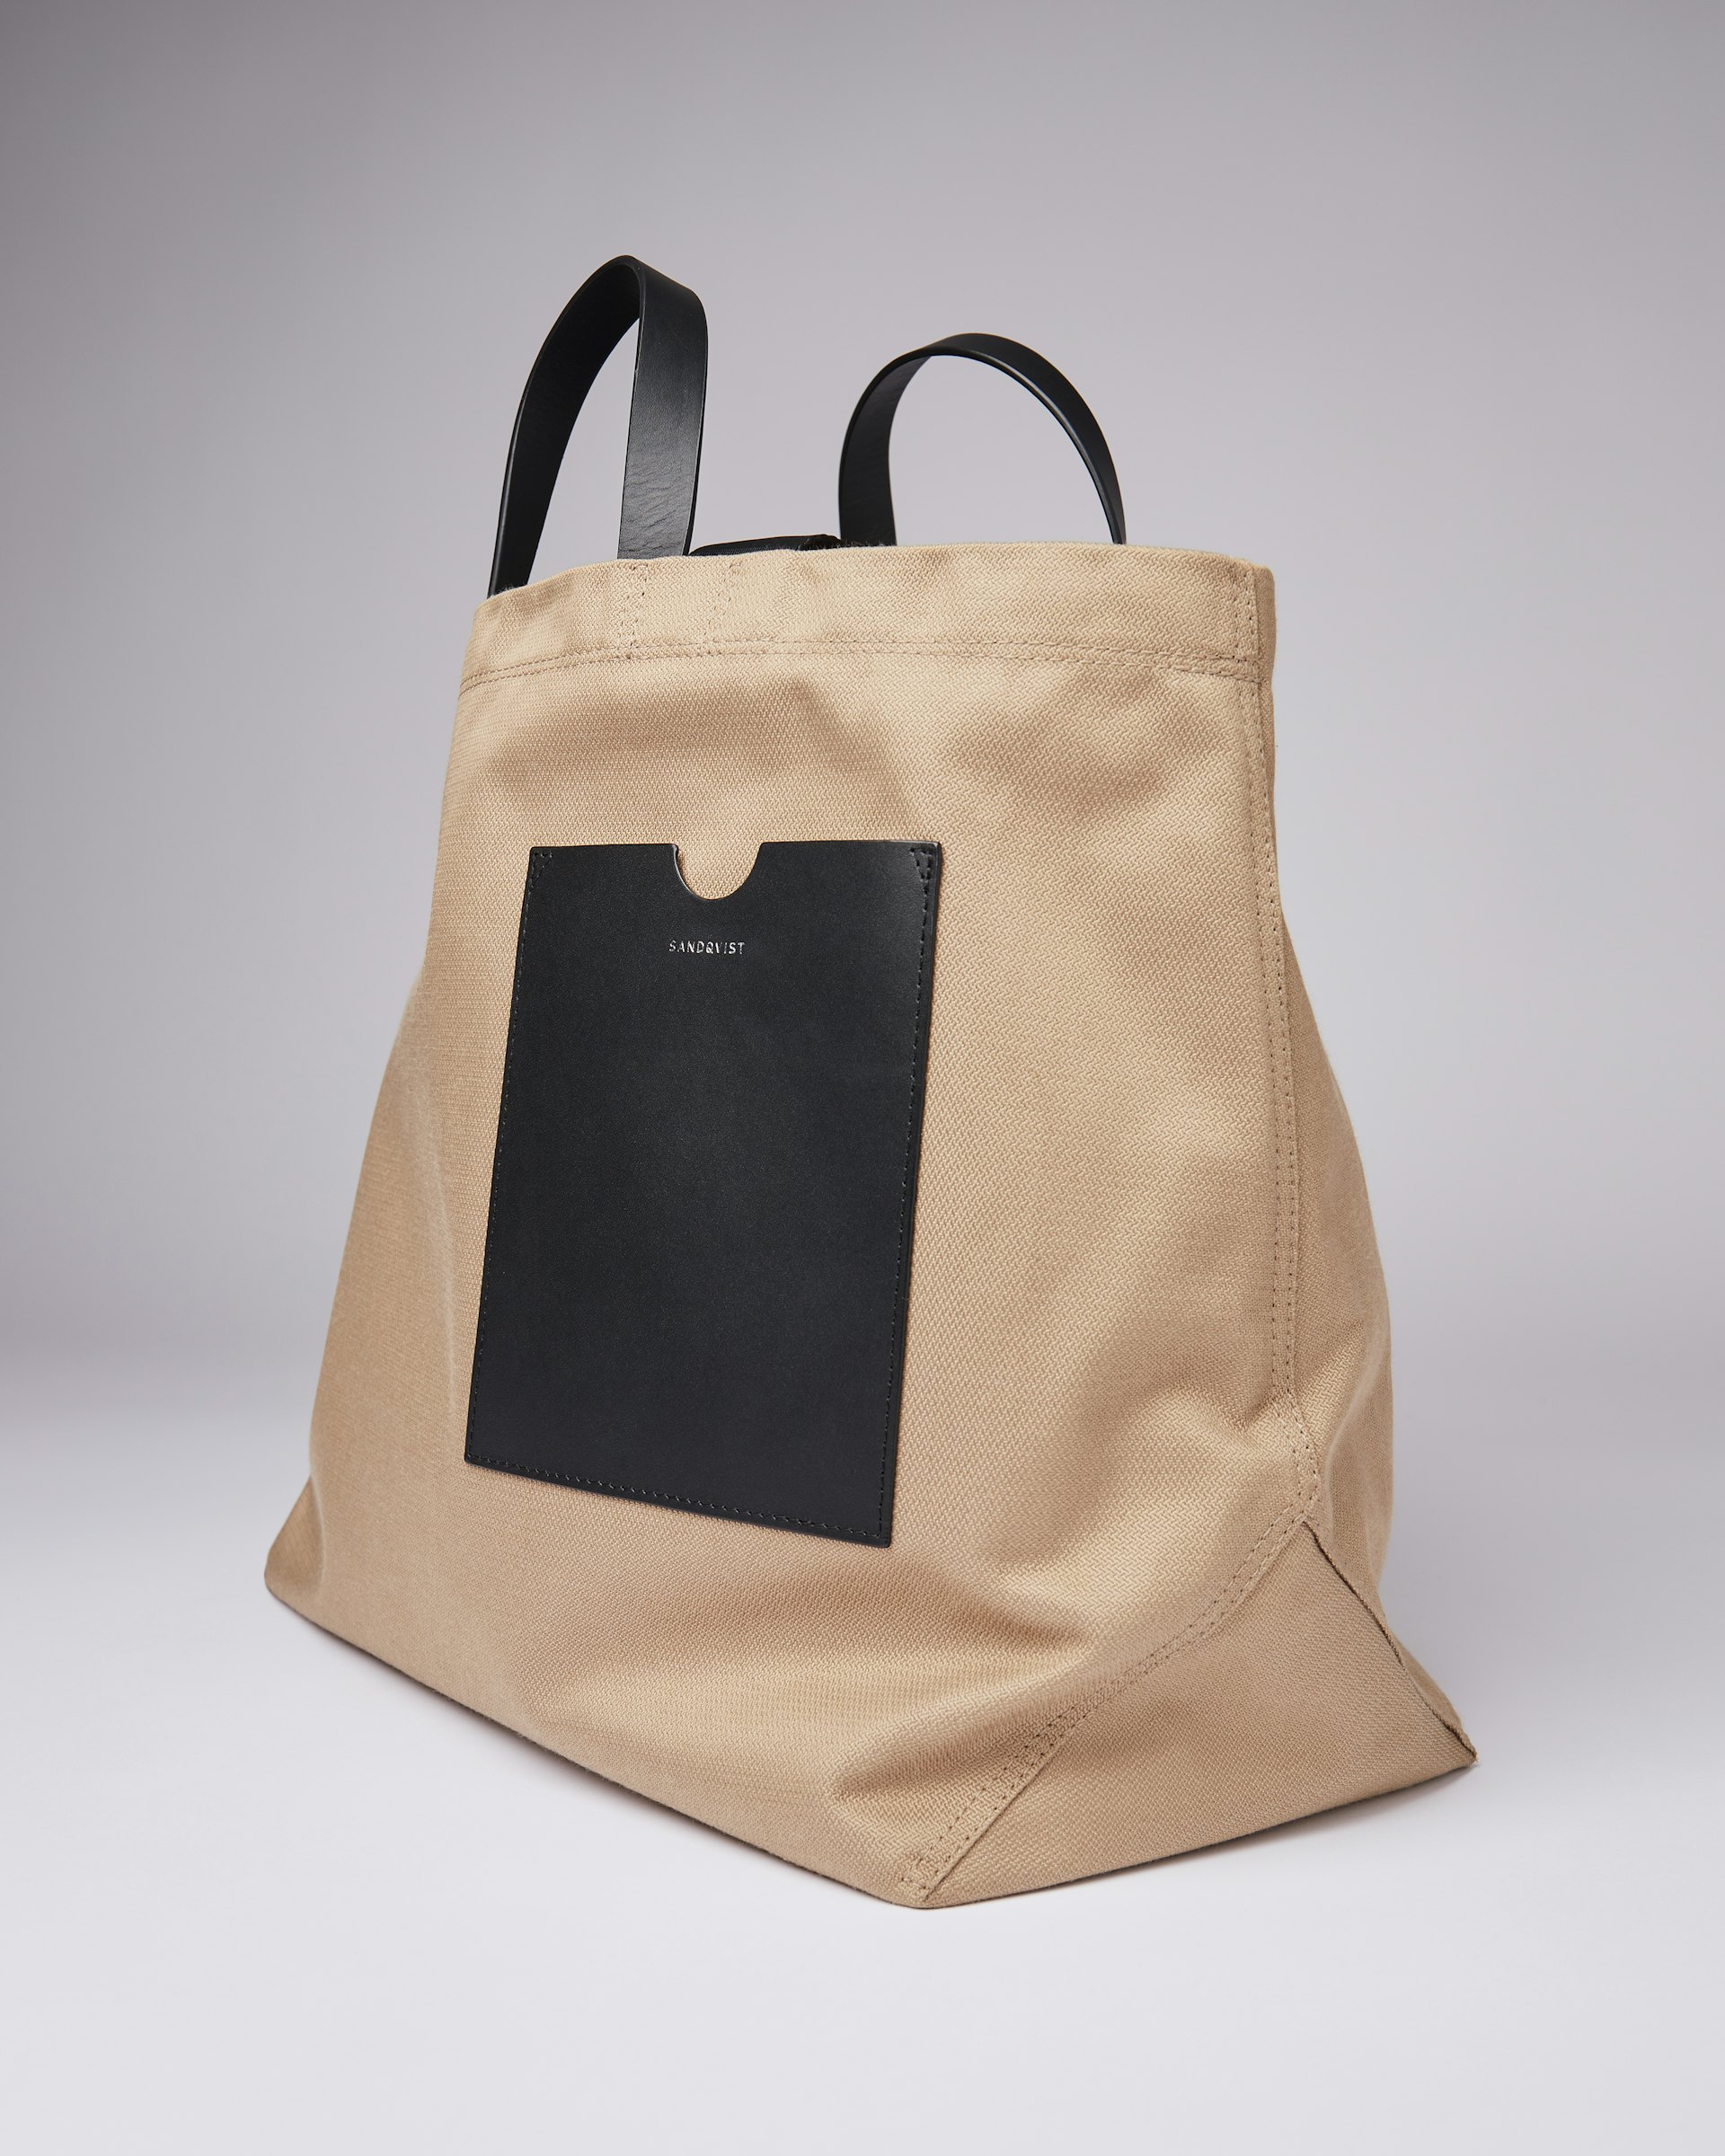 Agnes belongs to the category Tote bags and is in color black & beige (4 of 7)